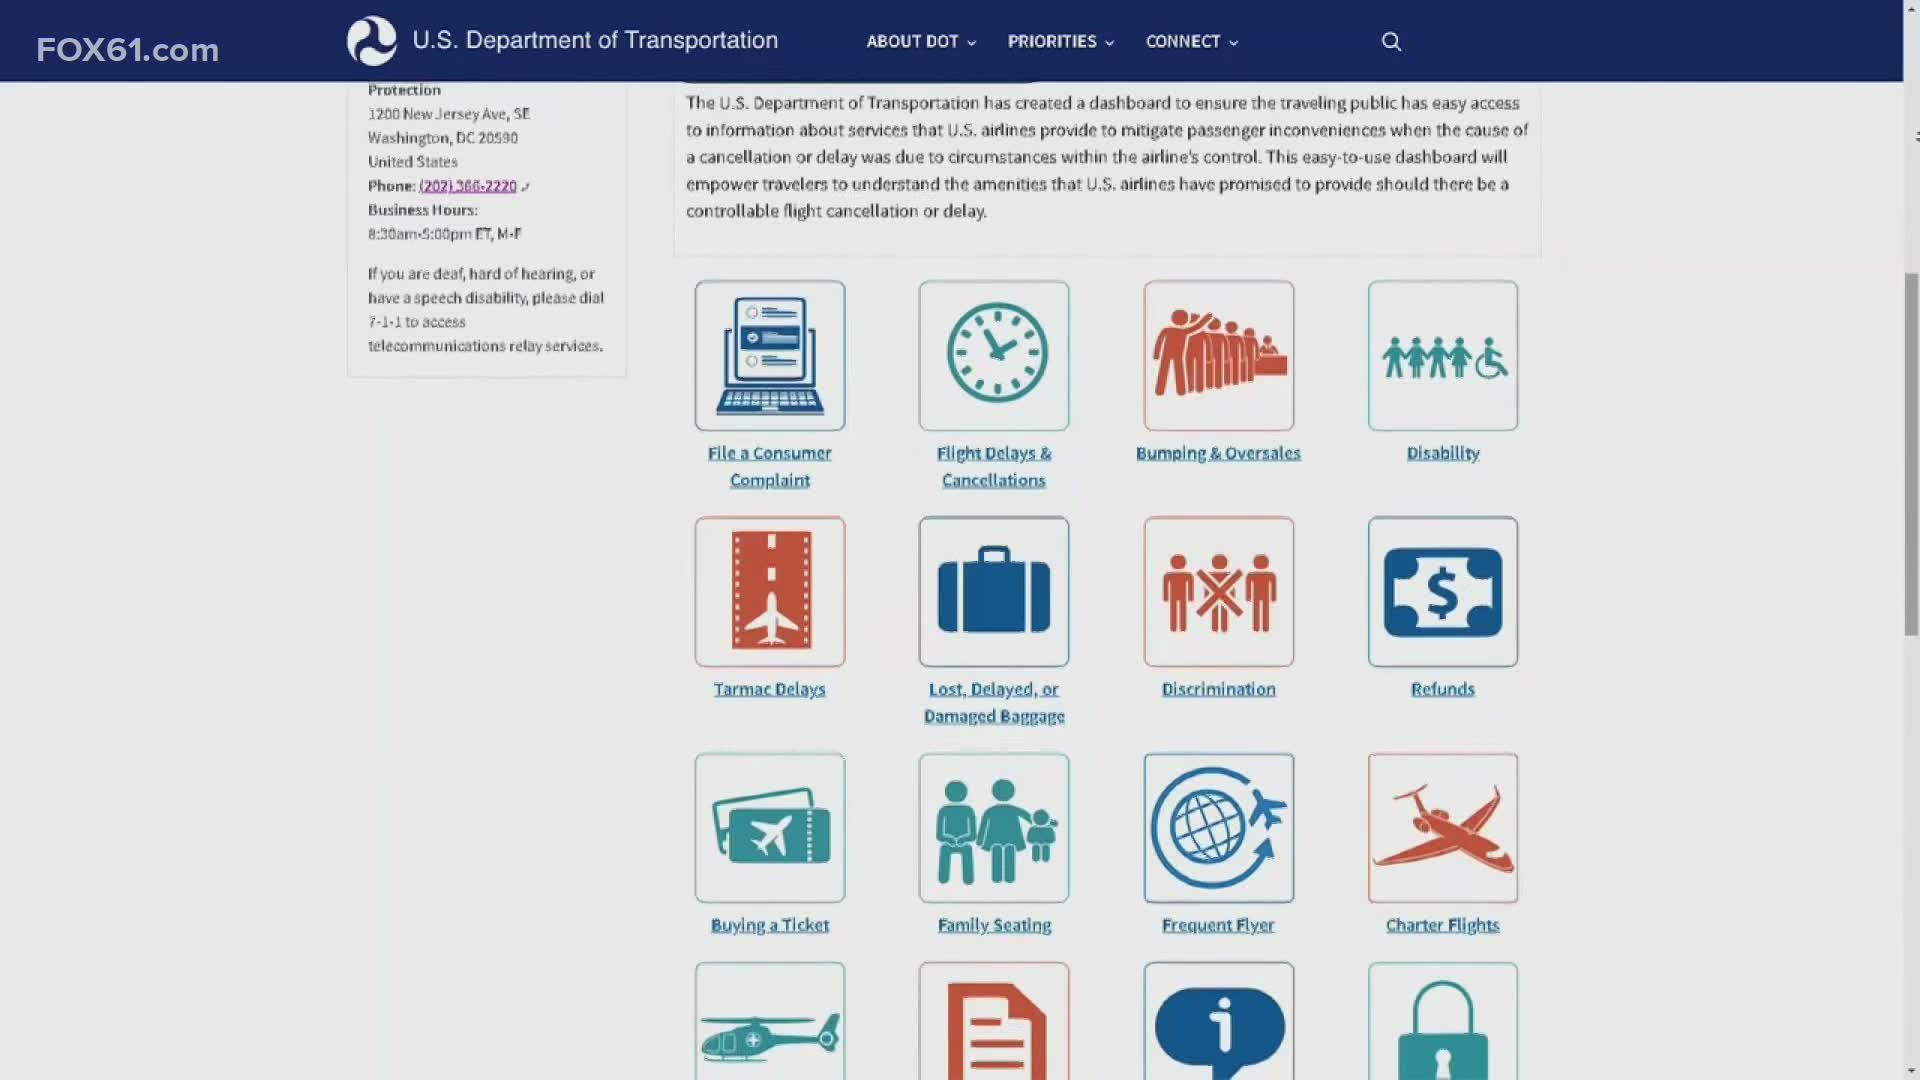 Just in time for Labor Day weekend, the U.S. government launched an airline customer service dashboard to help travelers.